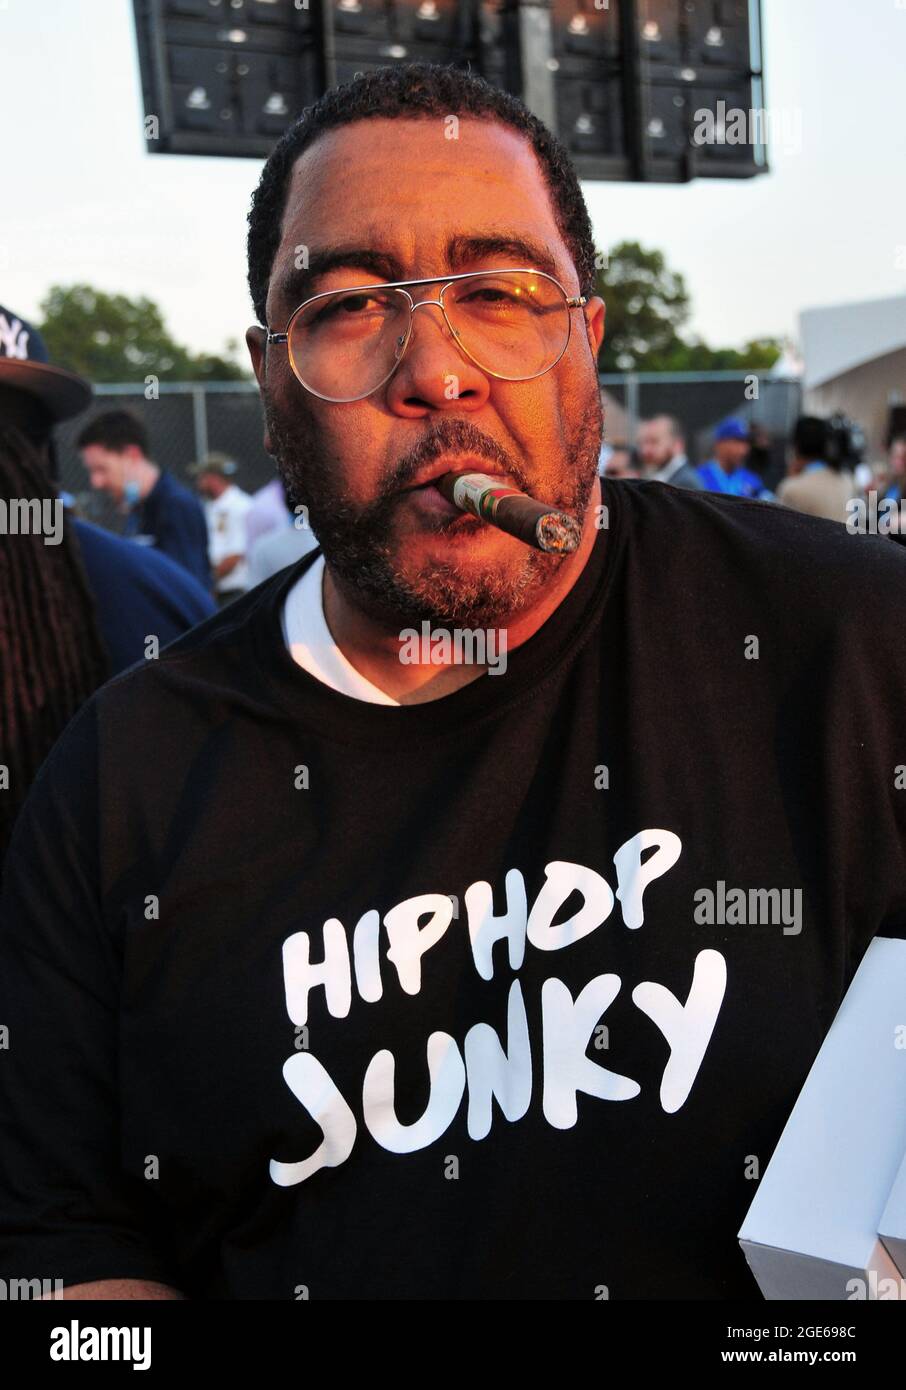 Bronx, NY, USA. 16th Aug, 2021. Teddy Ted attends the 'It's Time for Hip Hop in NYC' concert at Orchard Beach on August 16, 2021 in the Bronx, New York. Credit: Koi Sojer/Snap'n U Photos/Media Punch/Alamy Live News Stock Photo